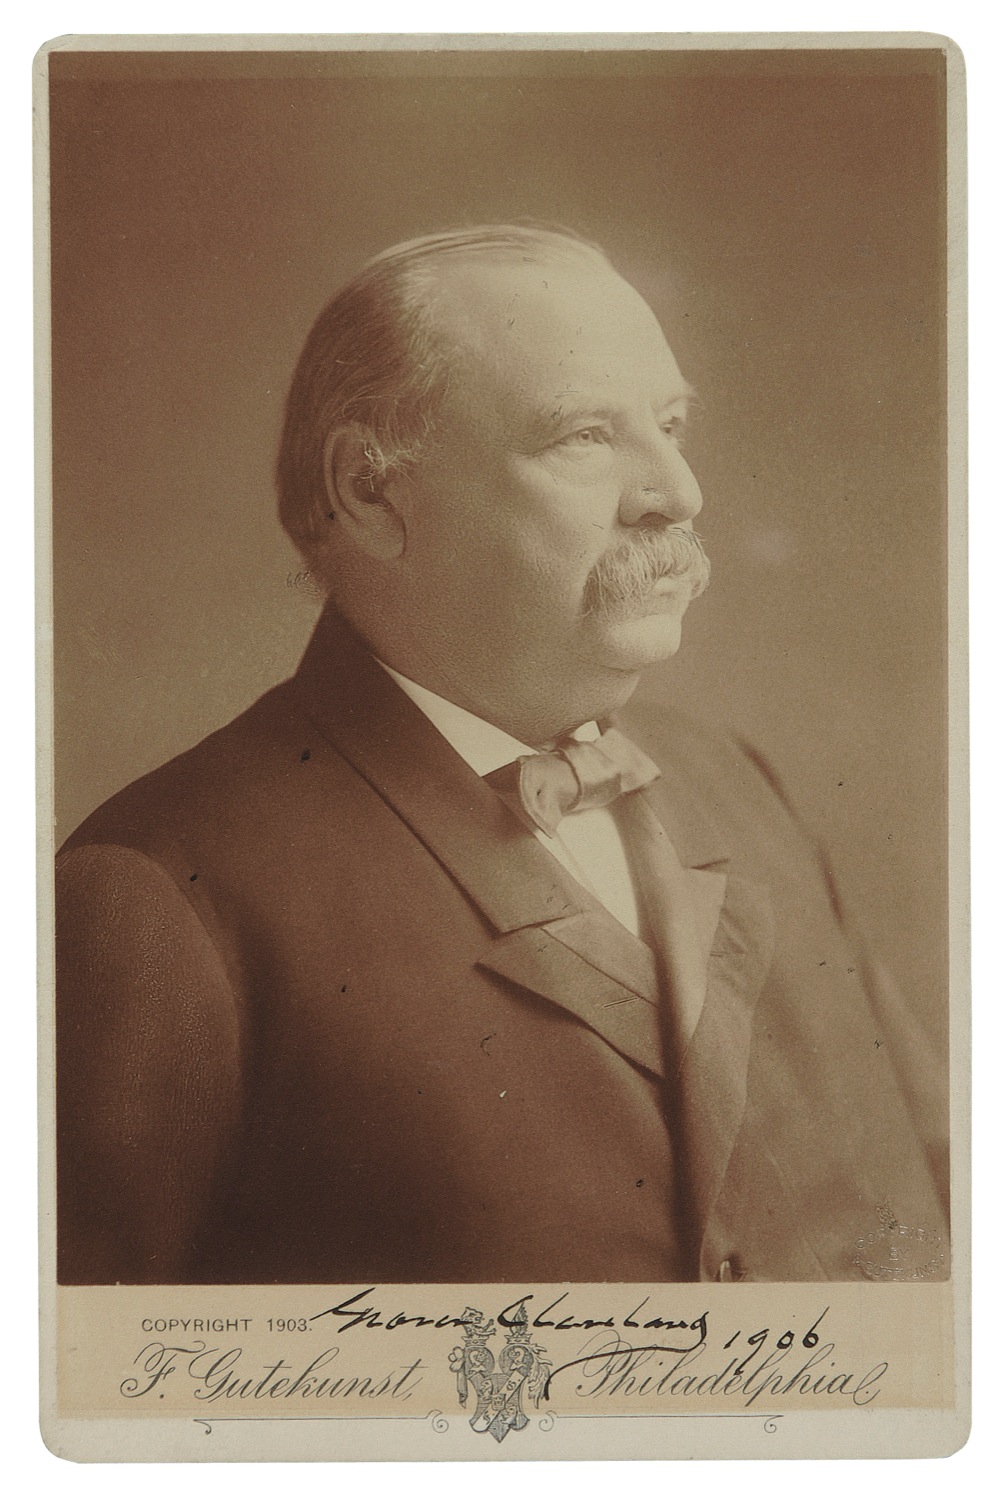 Lot #29 Grover Cleveland - Image 1